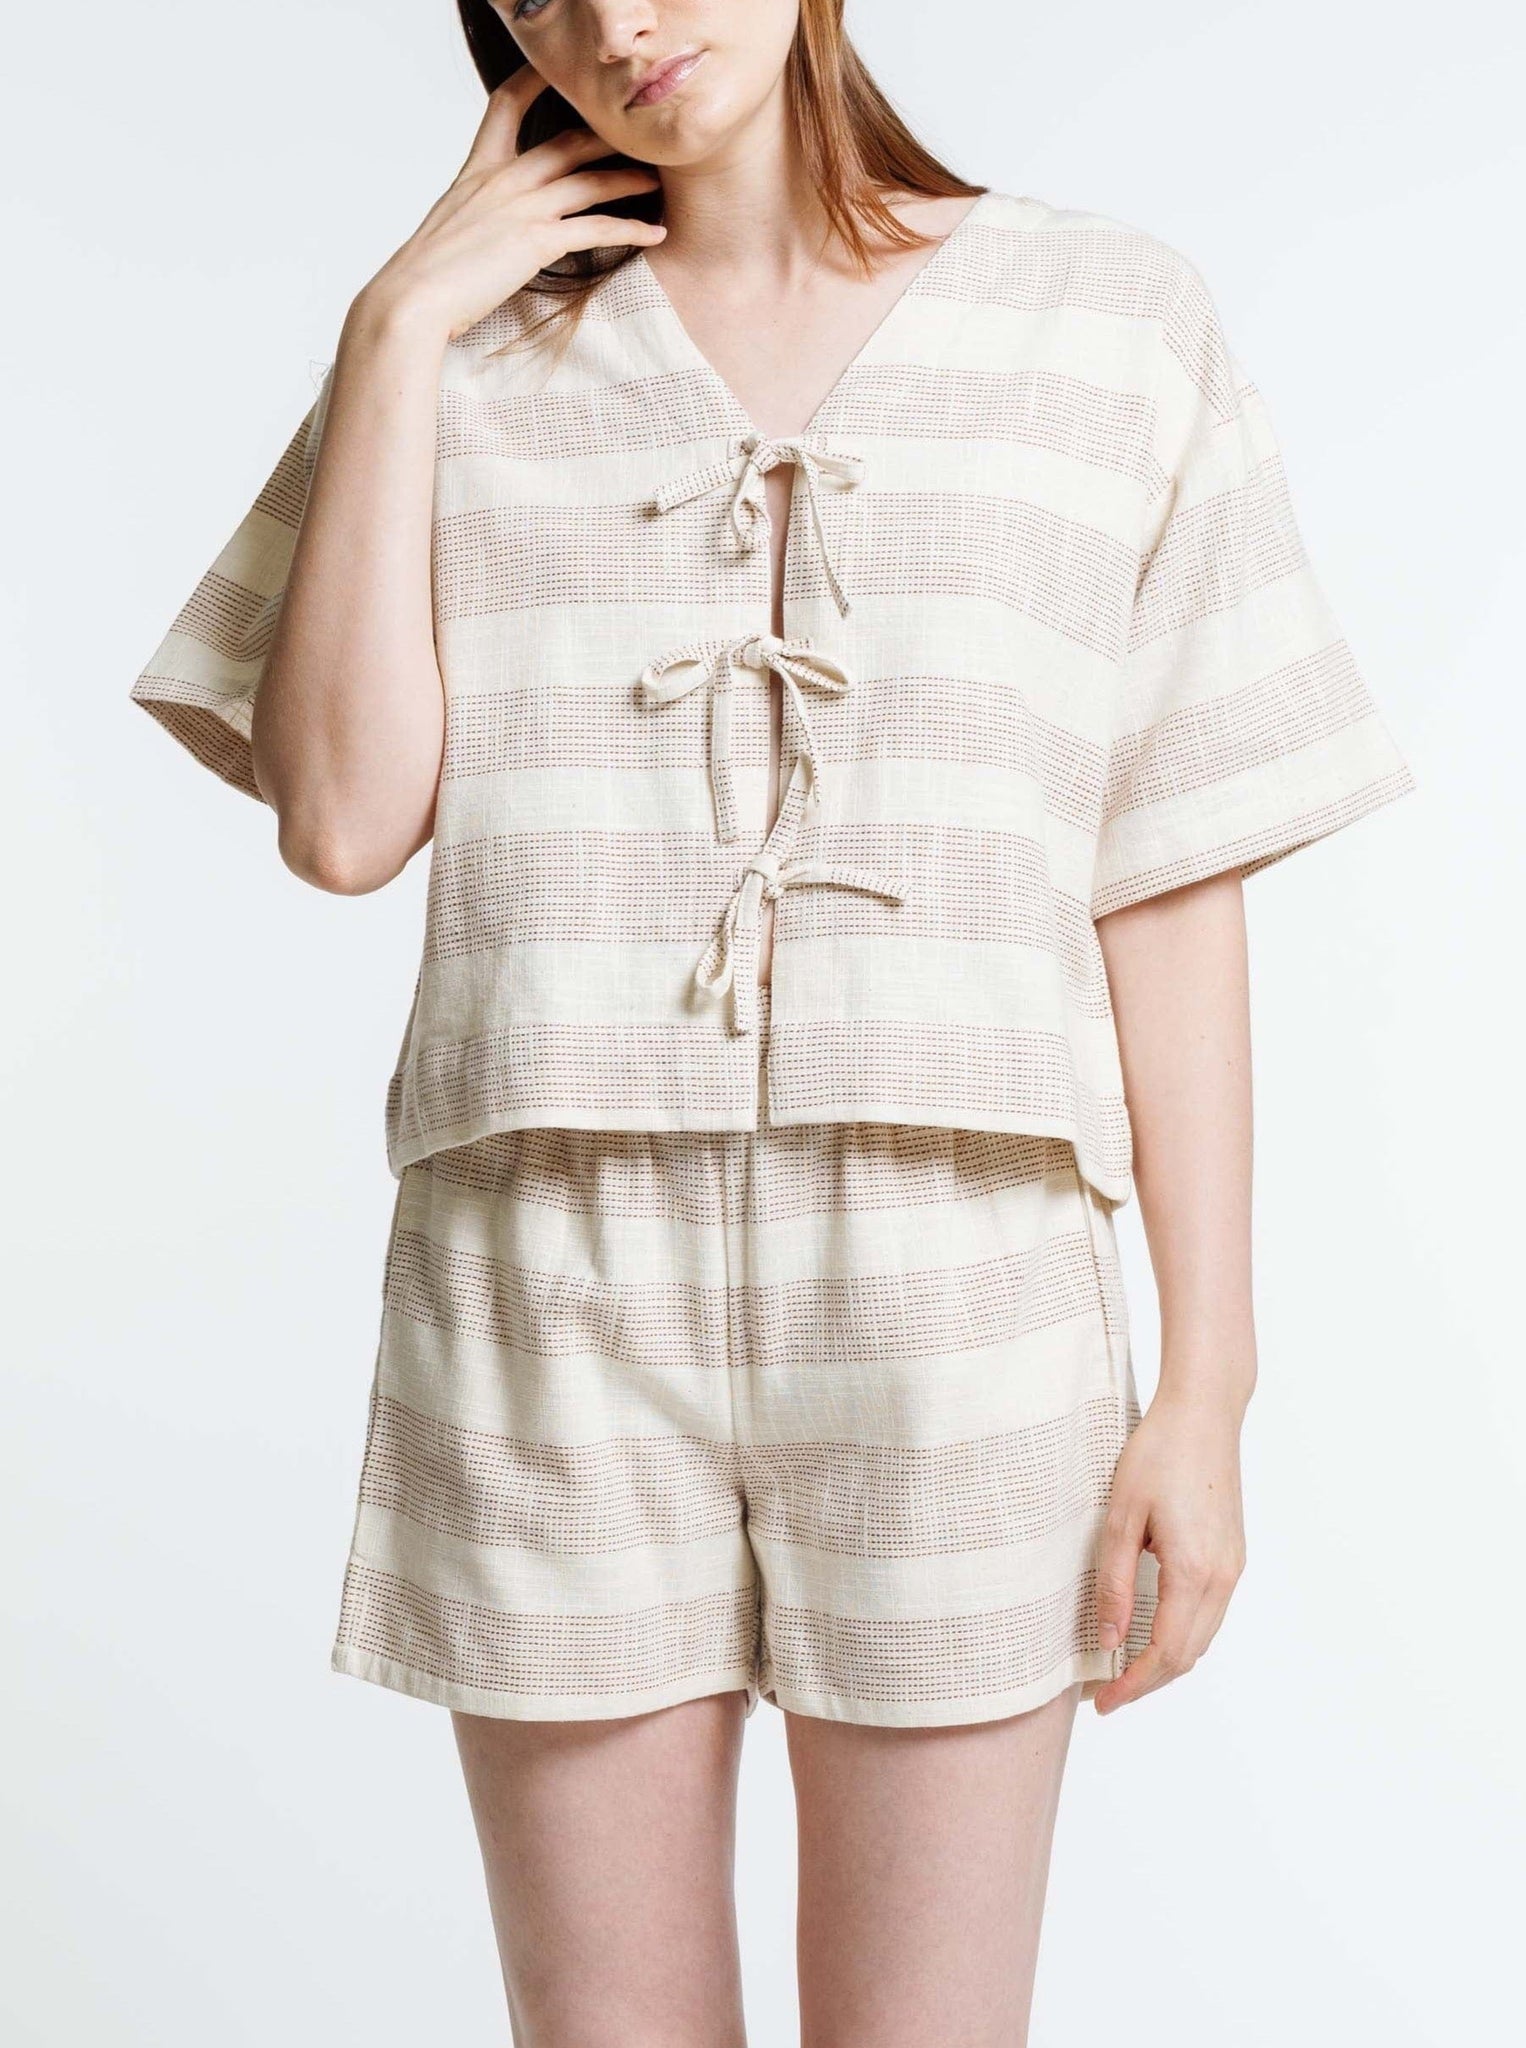 The model is wearing Everyday Shorts - Terracotta Ticking Stripe and a striped top.